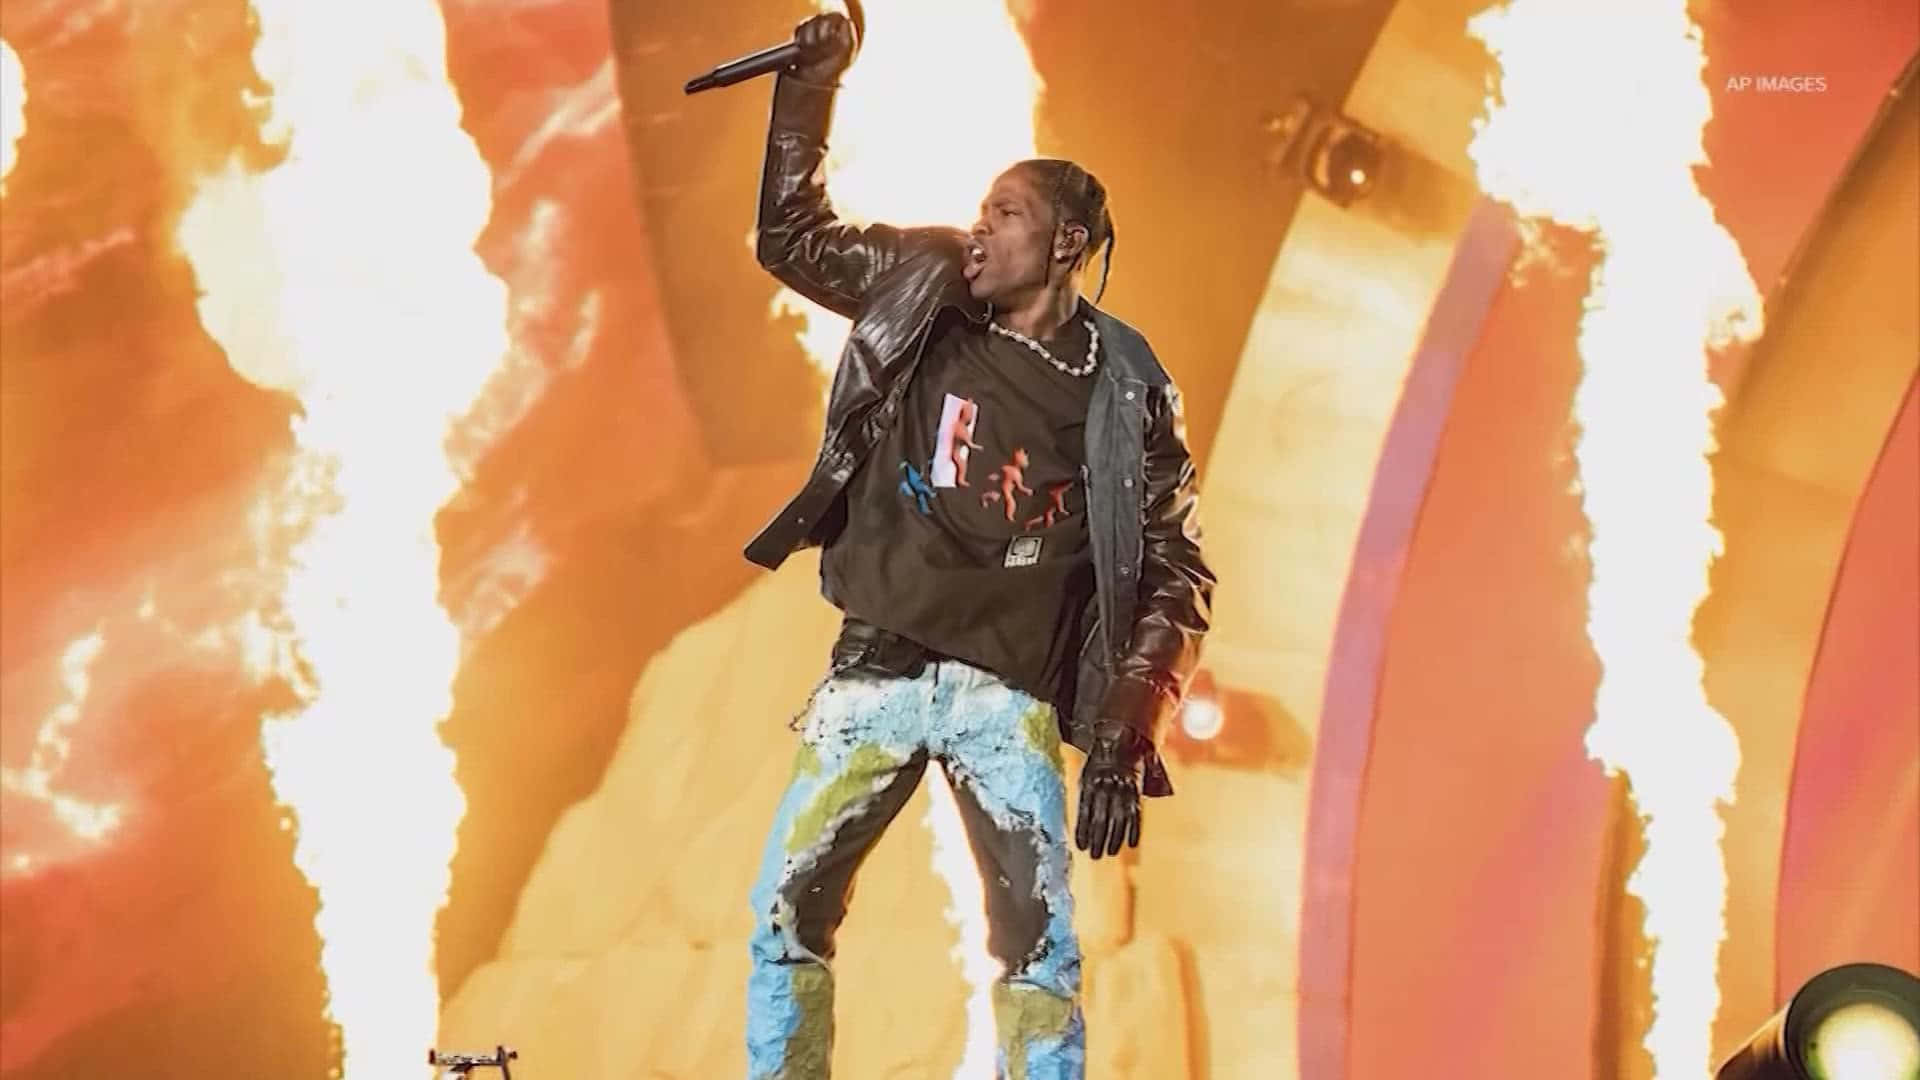 Thousands of fans join in person and online to experience Travis Scott's electrifying concert Wallpaper